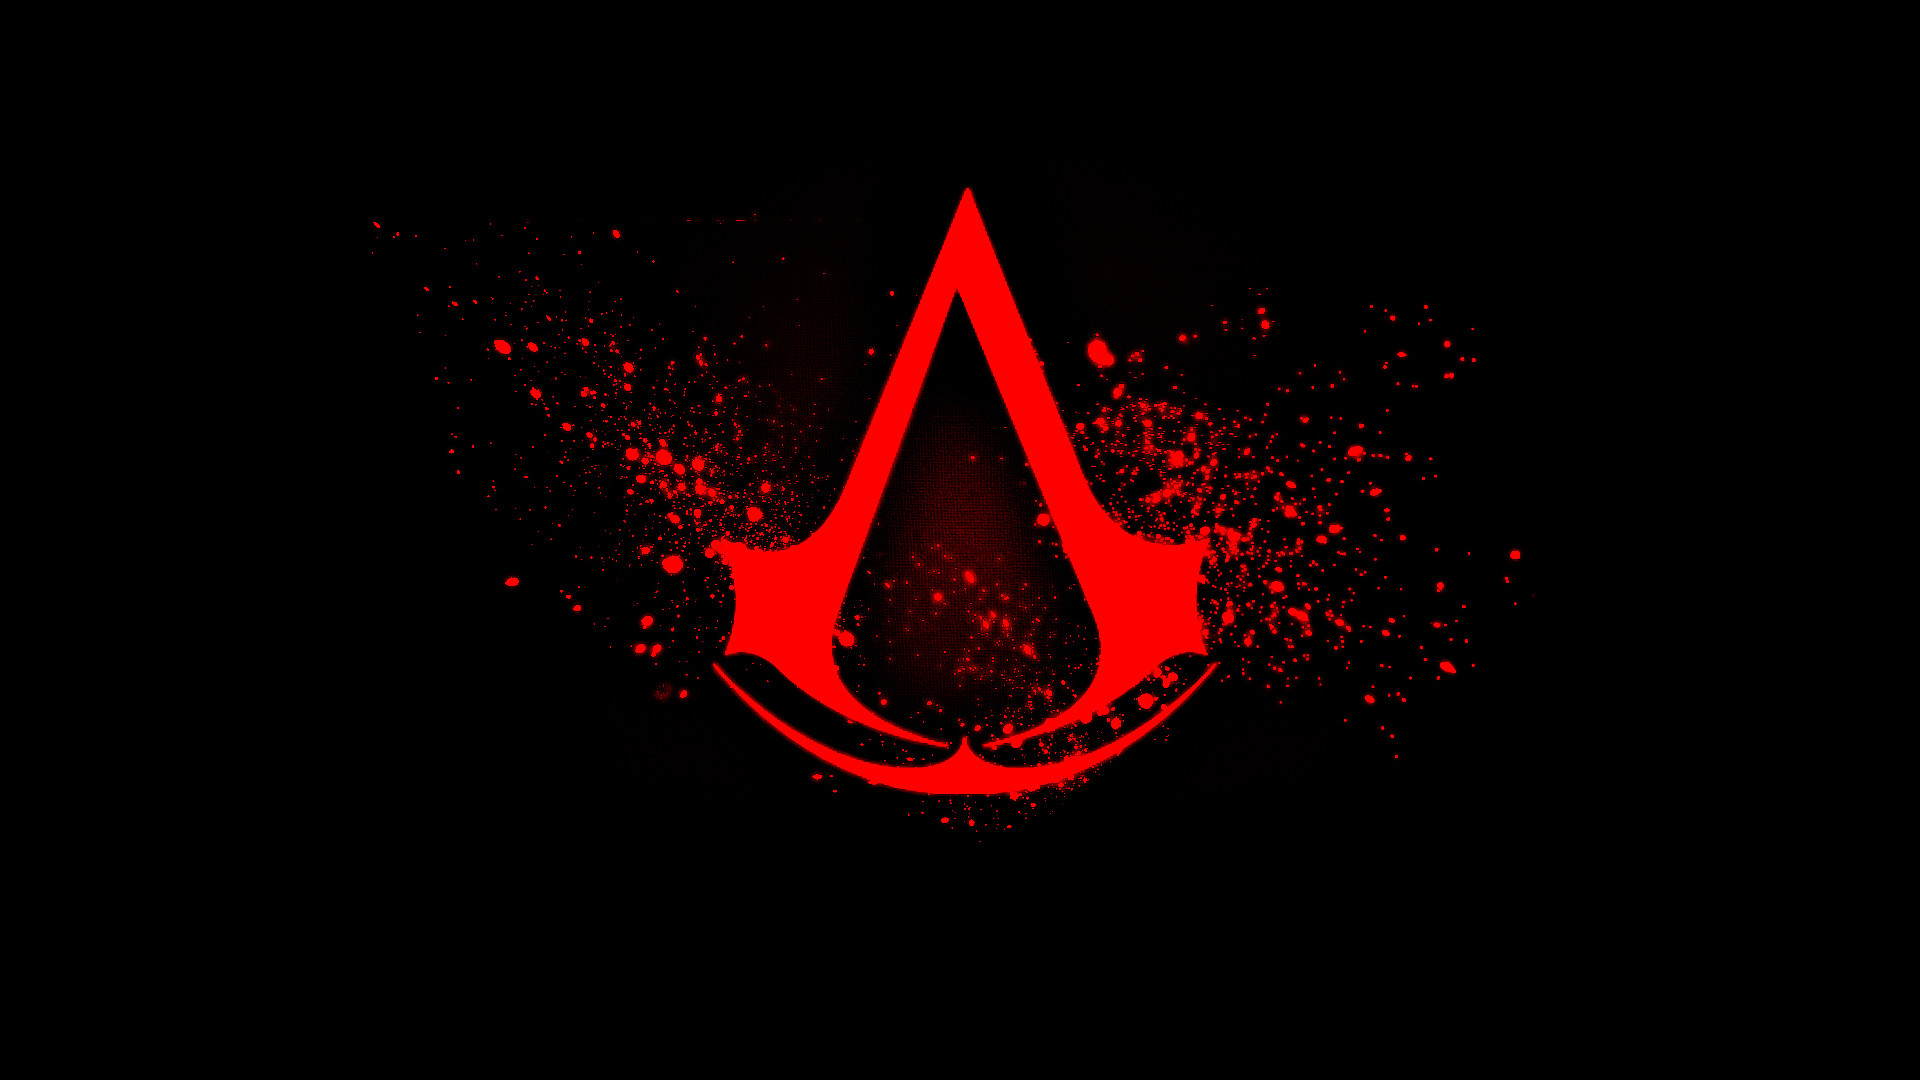 Video Game Assassins Creed 1920x1080